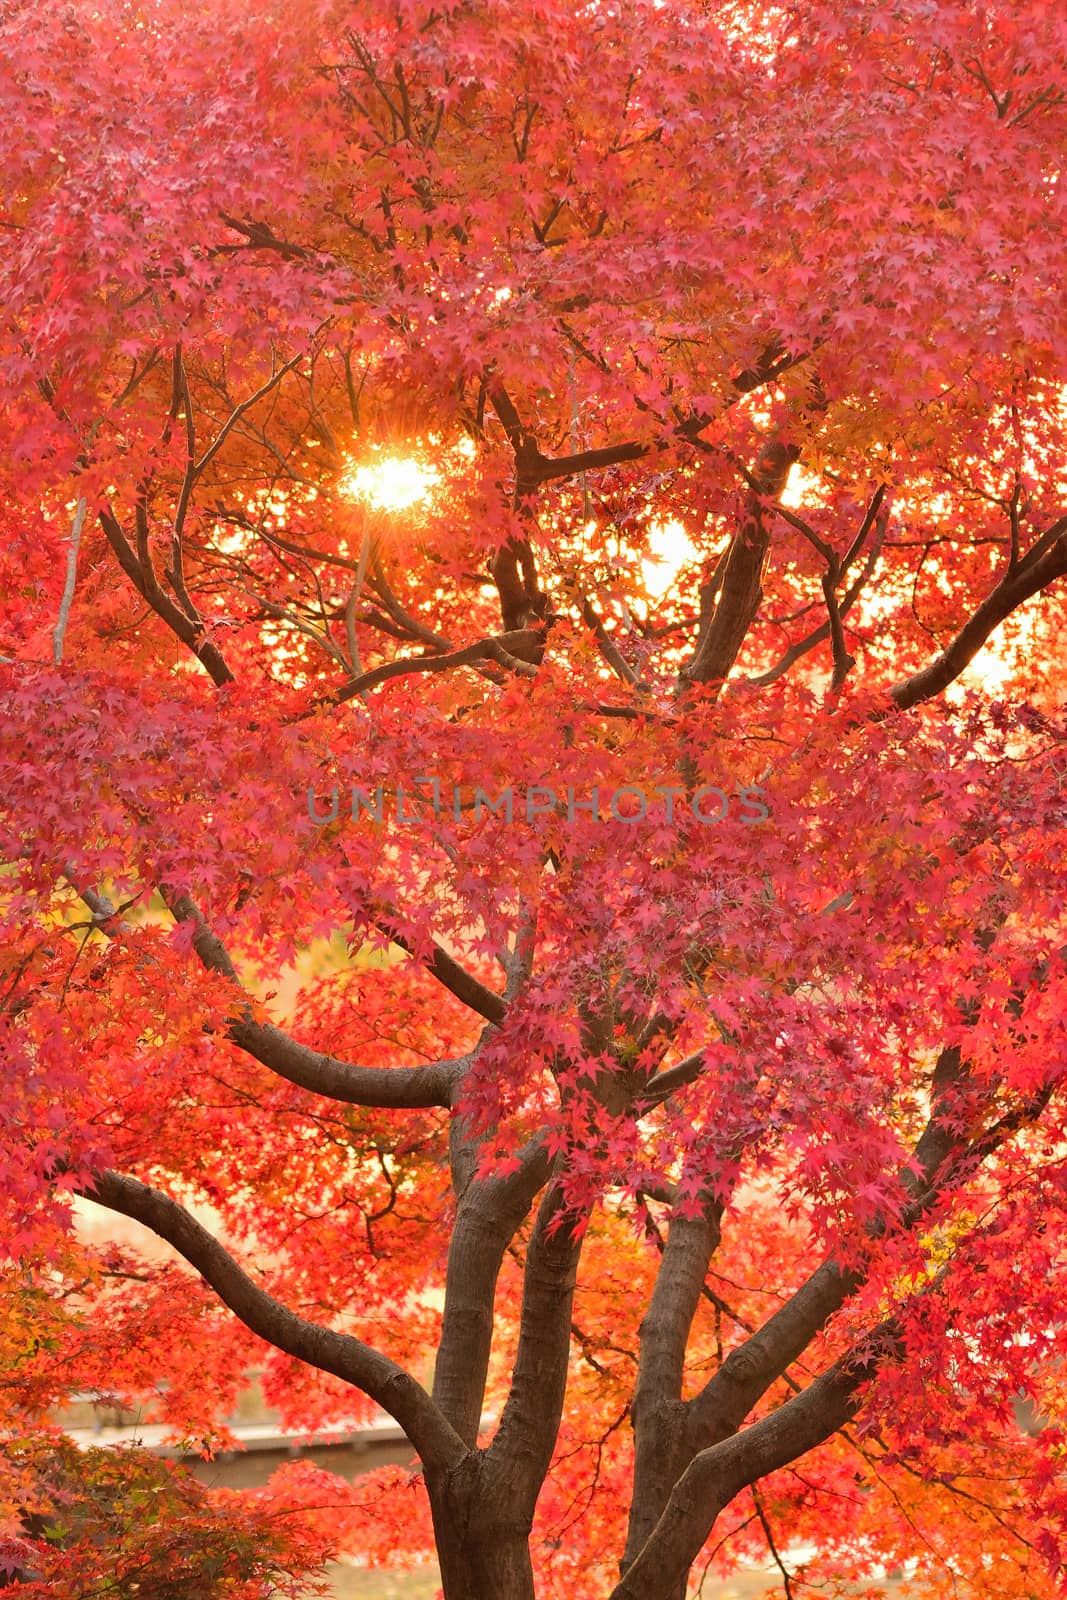 Landscape of Japanese Autumn Maple leaves with sunshine in vertical frame